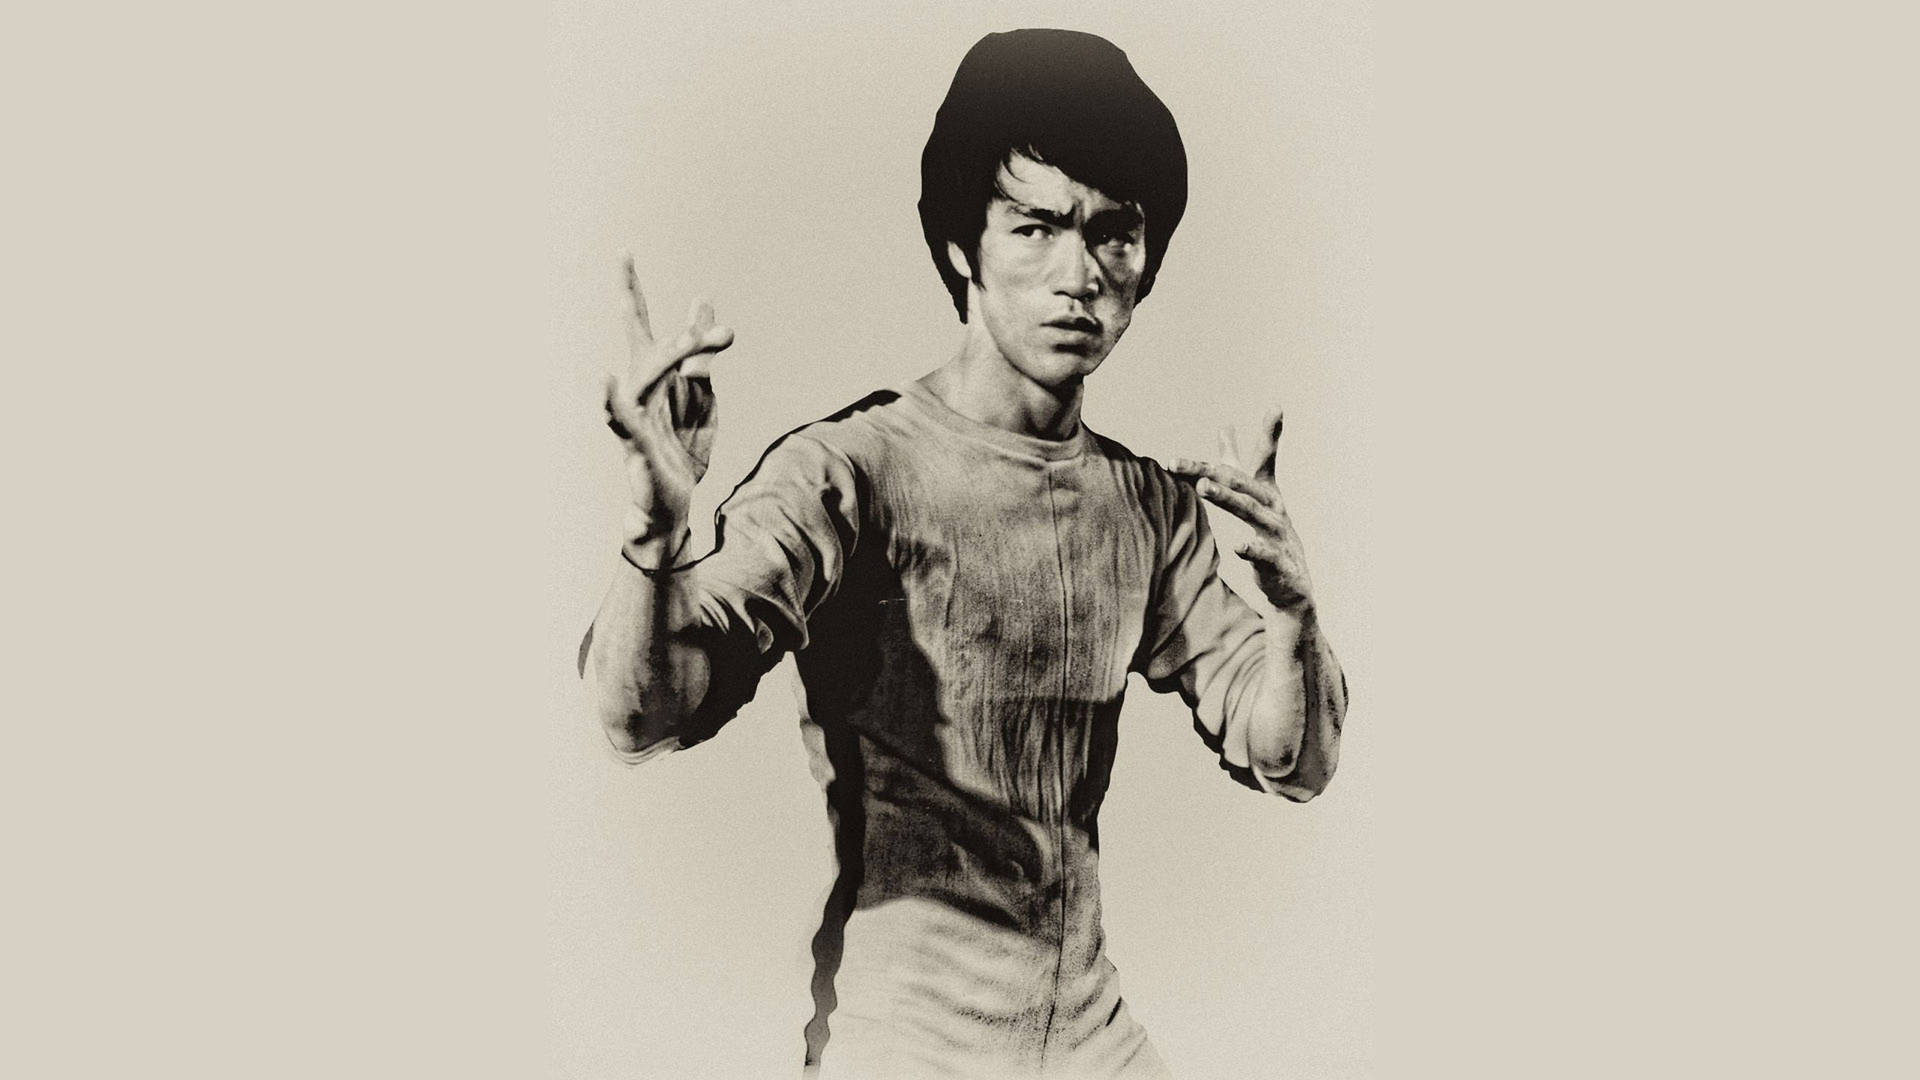 Bruce Lee - “the Dragon” Background